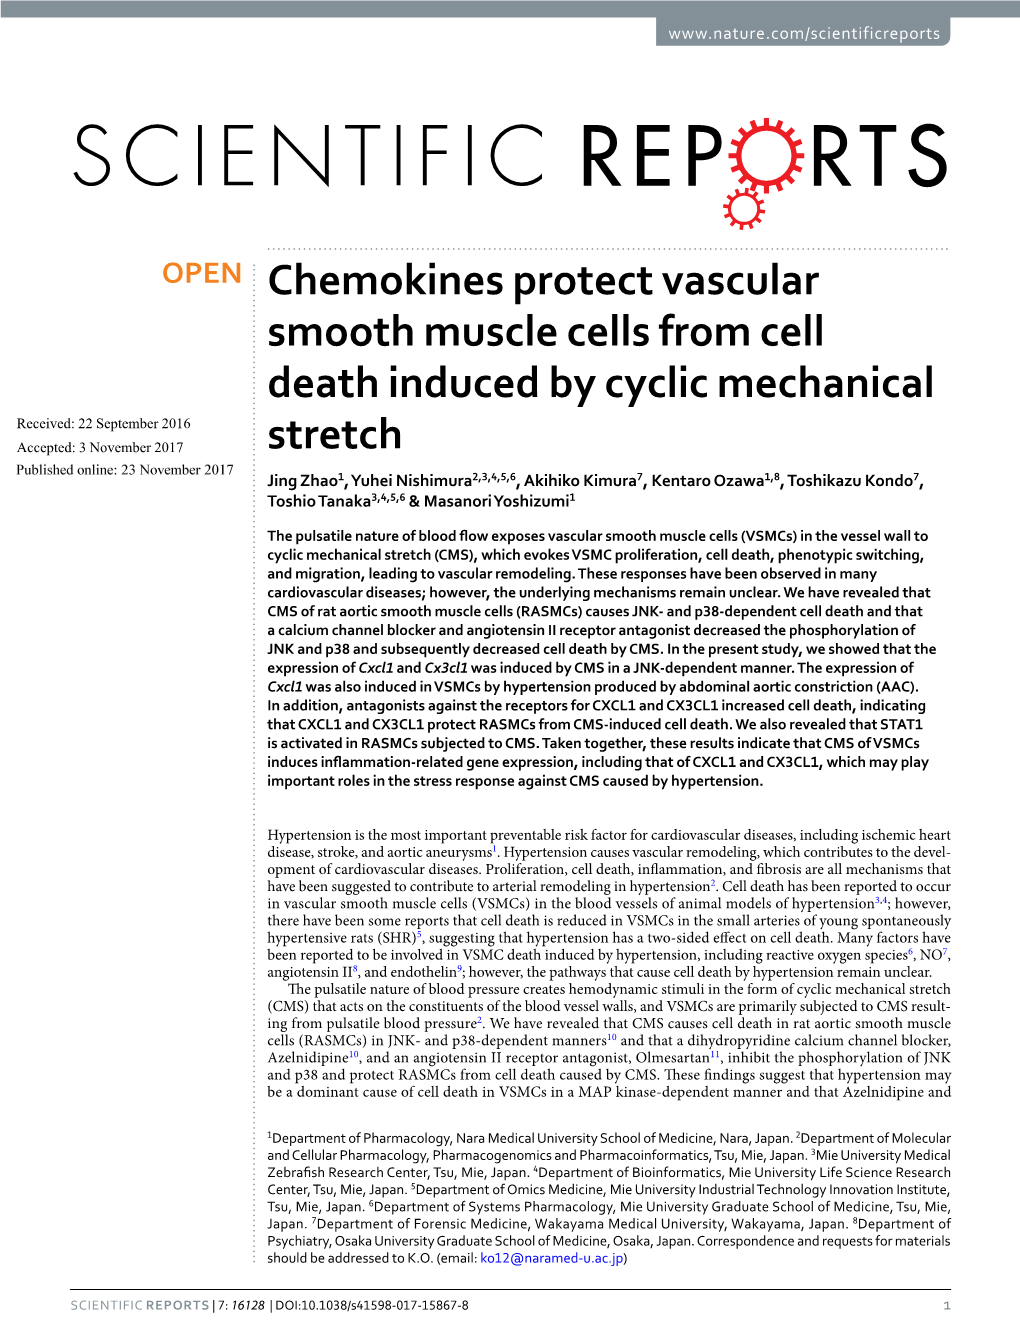 Chemokines Protect Vascular Smooth Muscle Cells from Cell Death